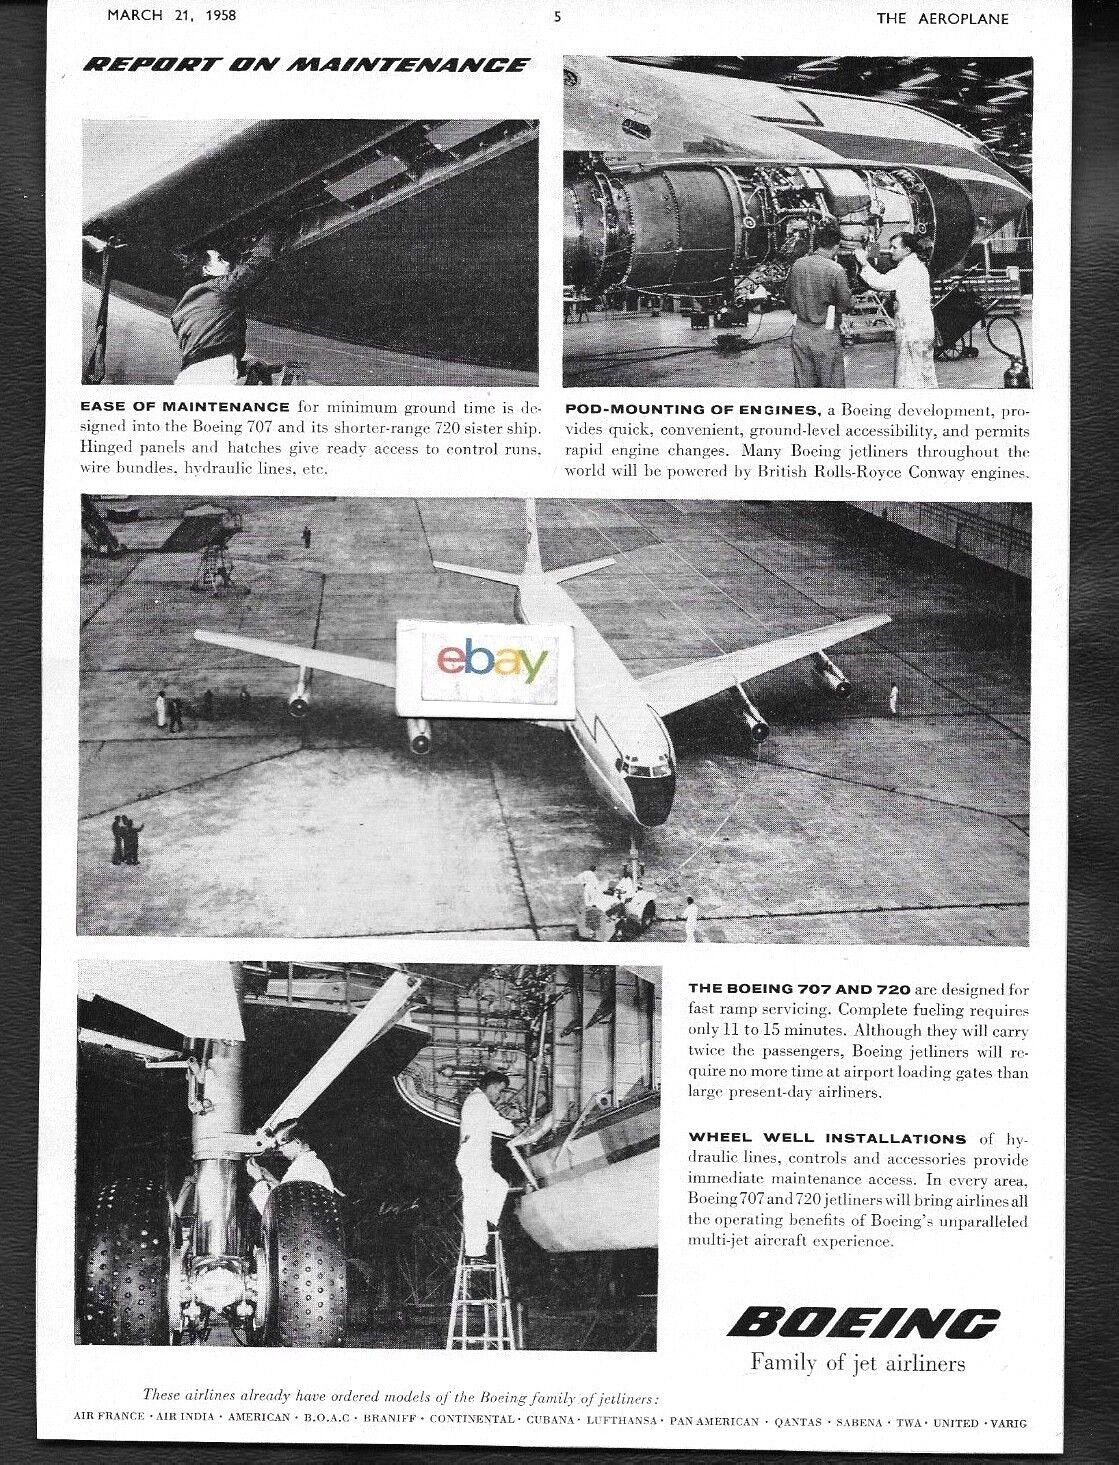  BOEING AIRCRAFT COMPANY 1958 BOEING 707 REPORT ON MAINTENANCE AD